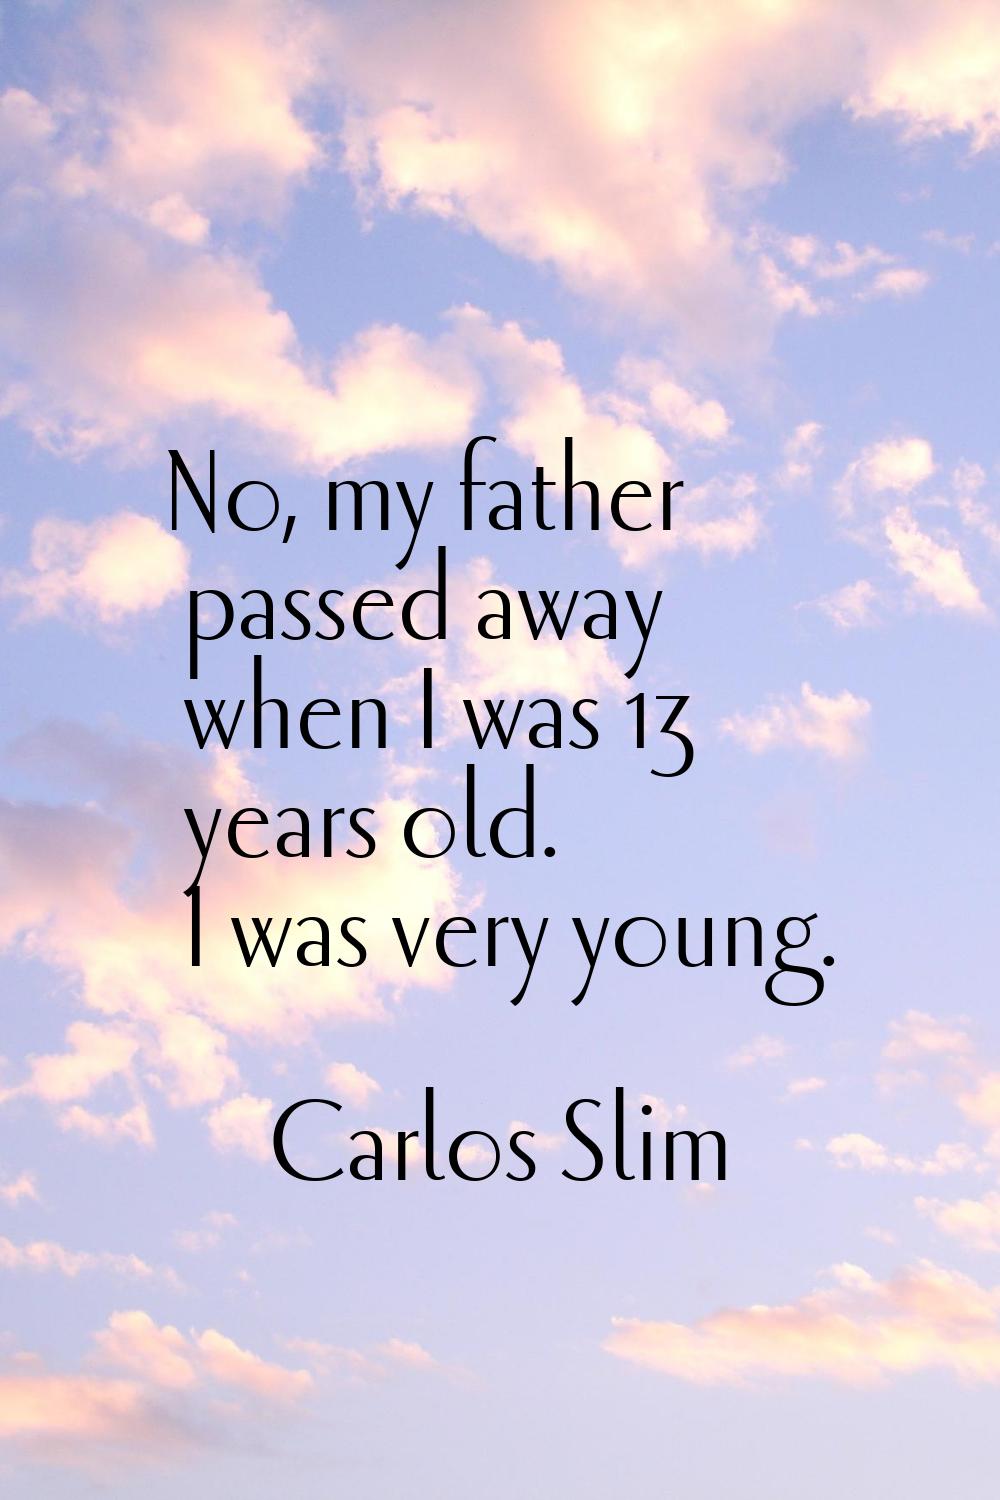 No, my father passed away when I was 13 years old. I was very young.